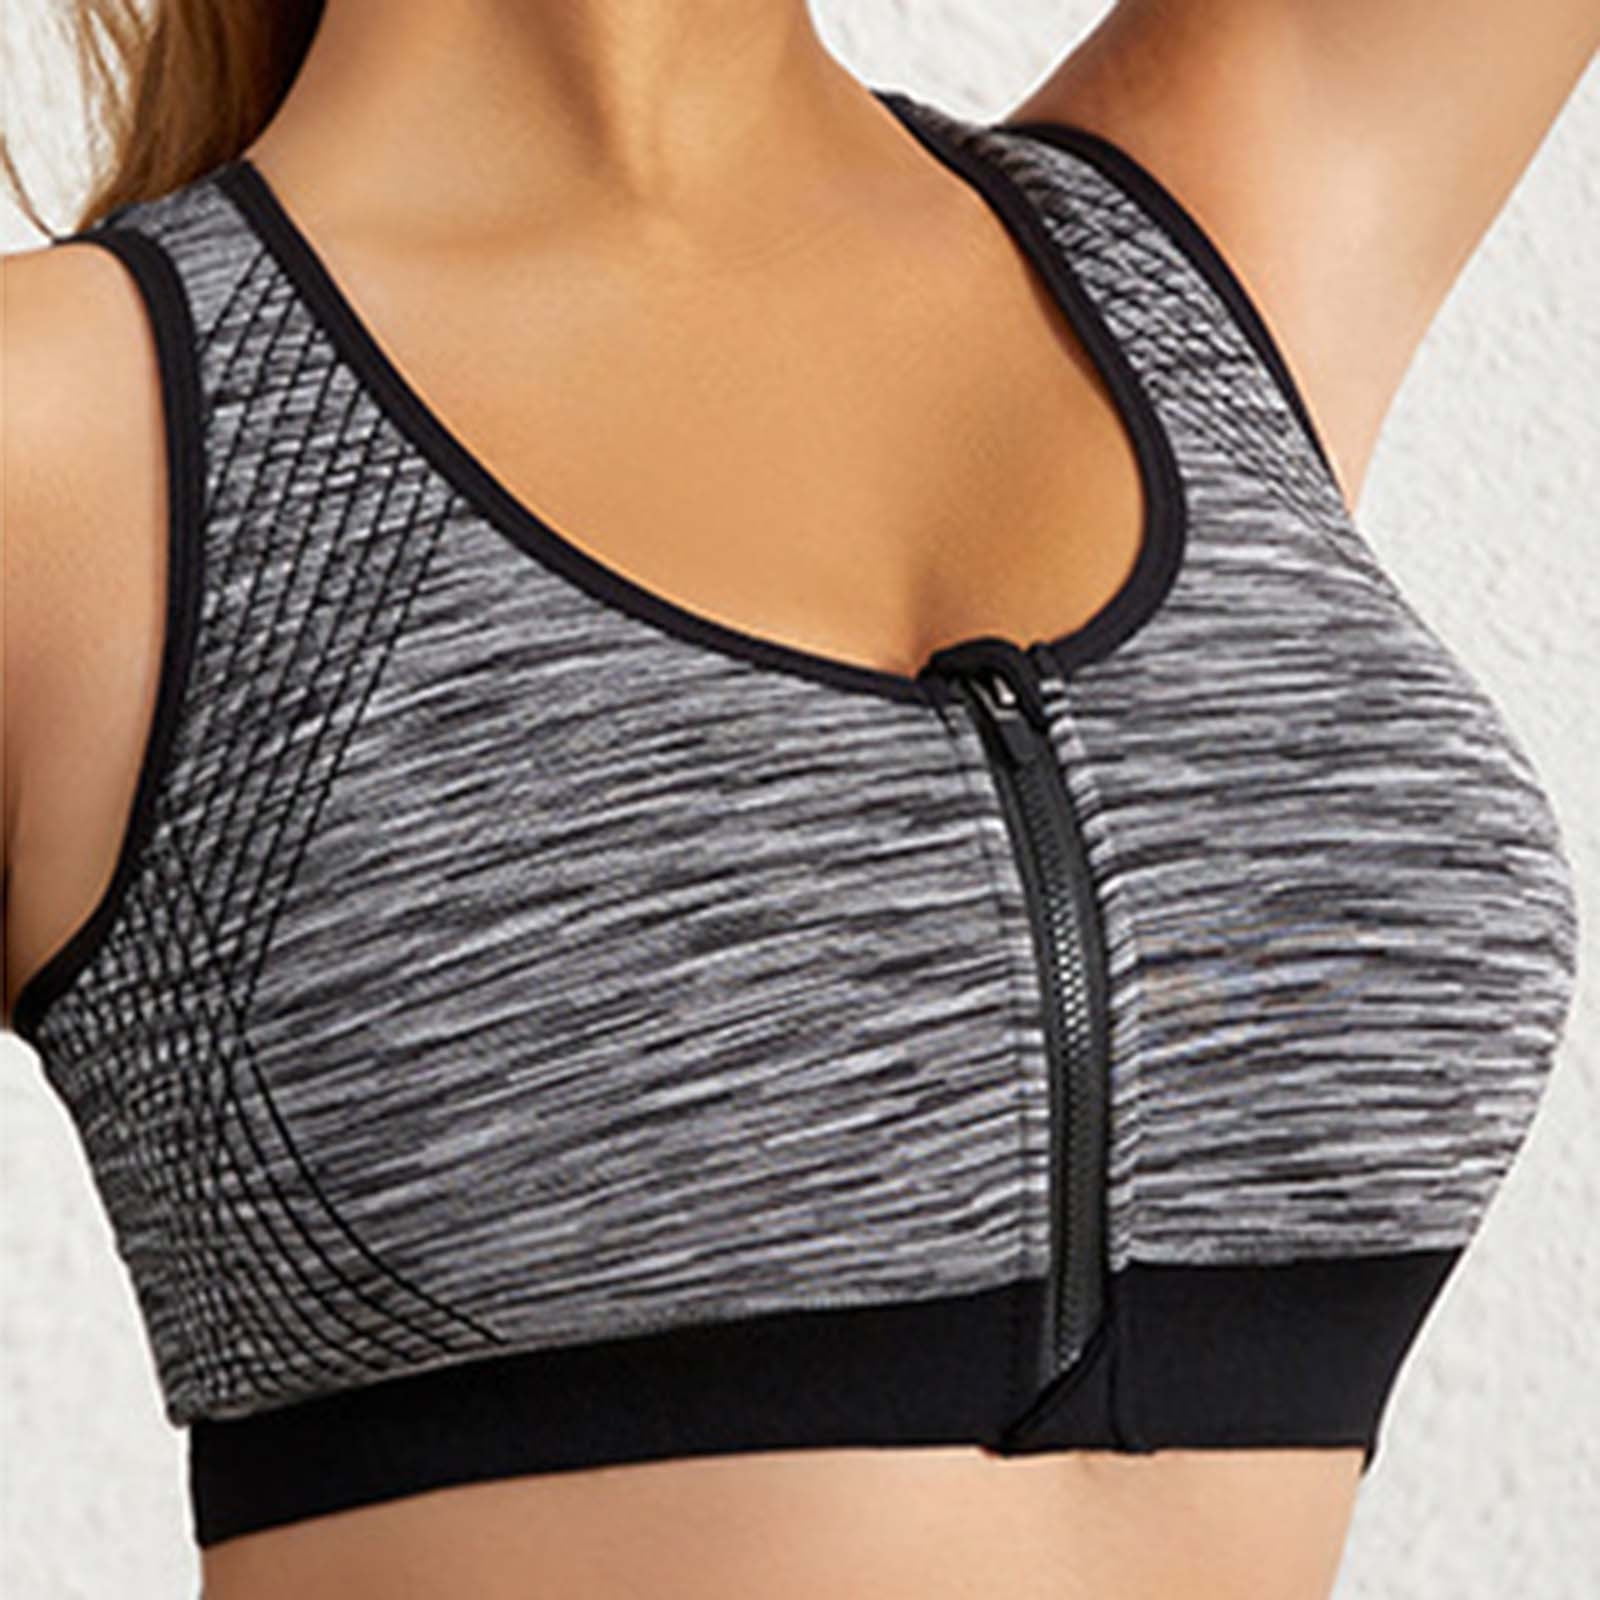 JNGSA Sports Bra, Bras for Large Breasted Women Woman Sexy Ladies